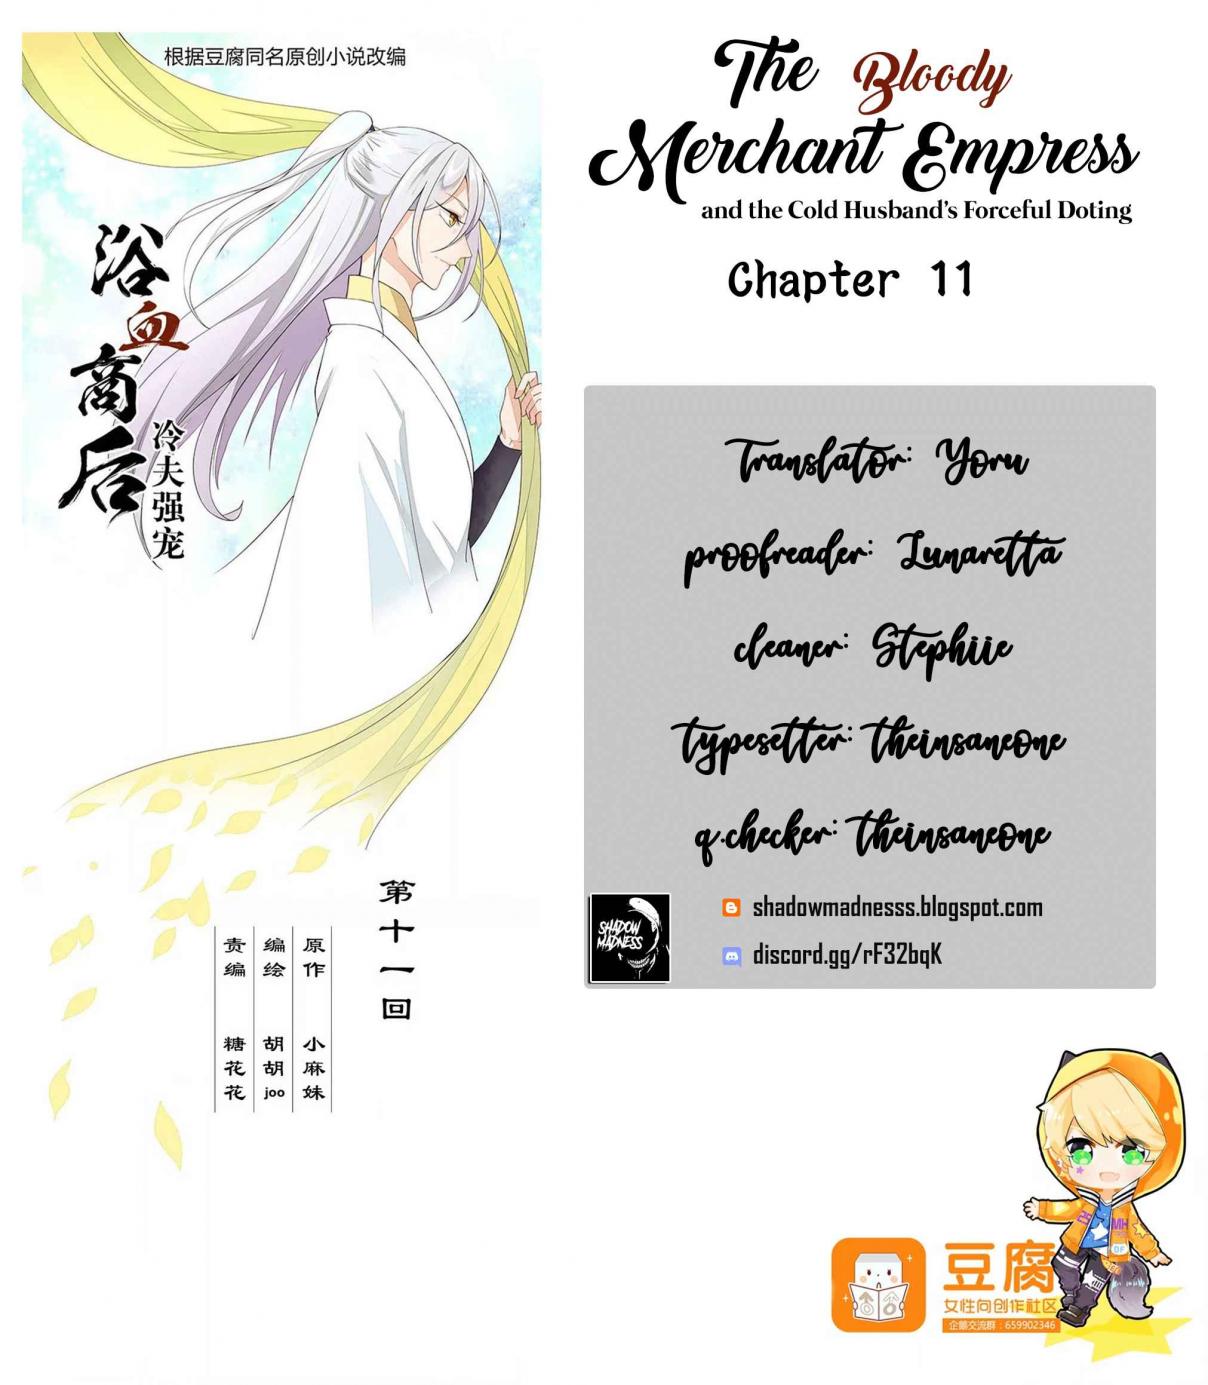 The Bloody Merchant Empress and the Cold Husband's Forceful Doting Ch. 11